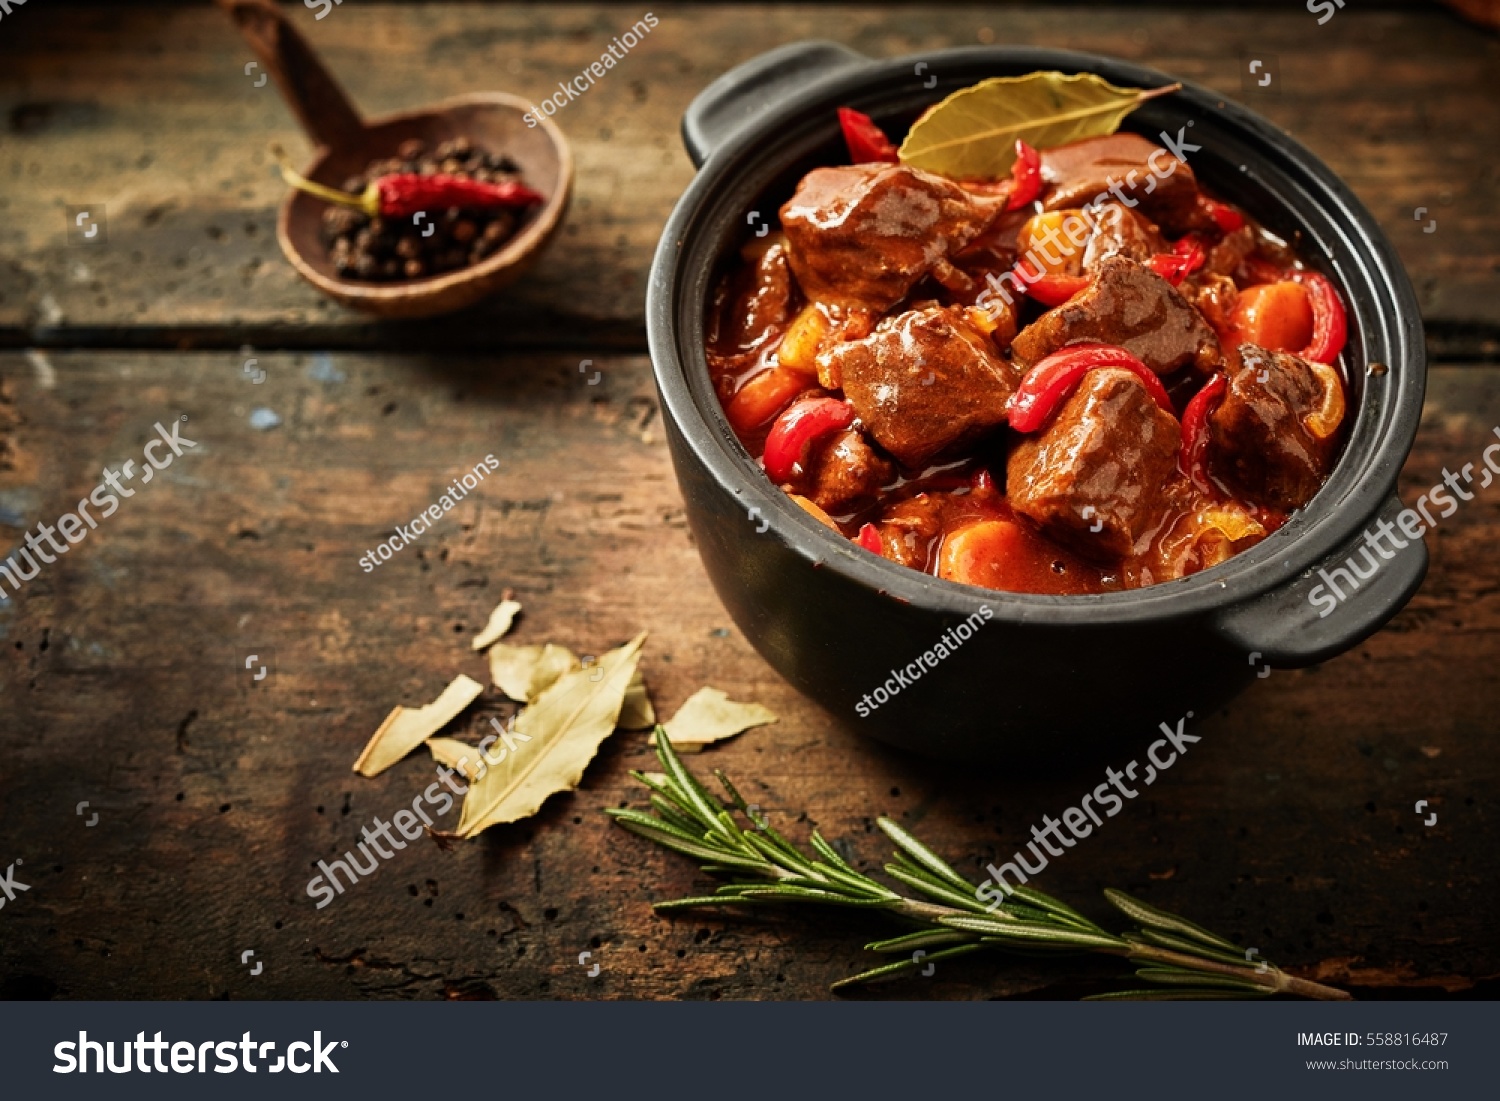 Pot of hungarian goulash on rustic wood background with chili peppers and laurel and copy space #558816487